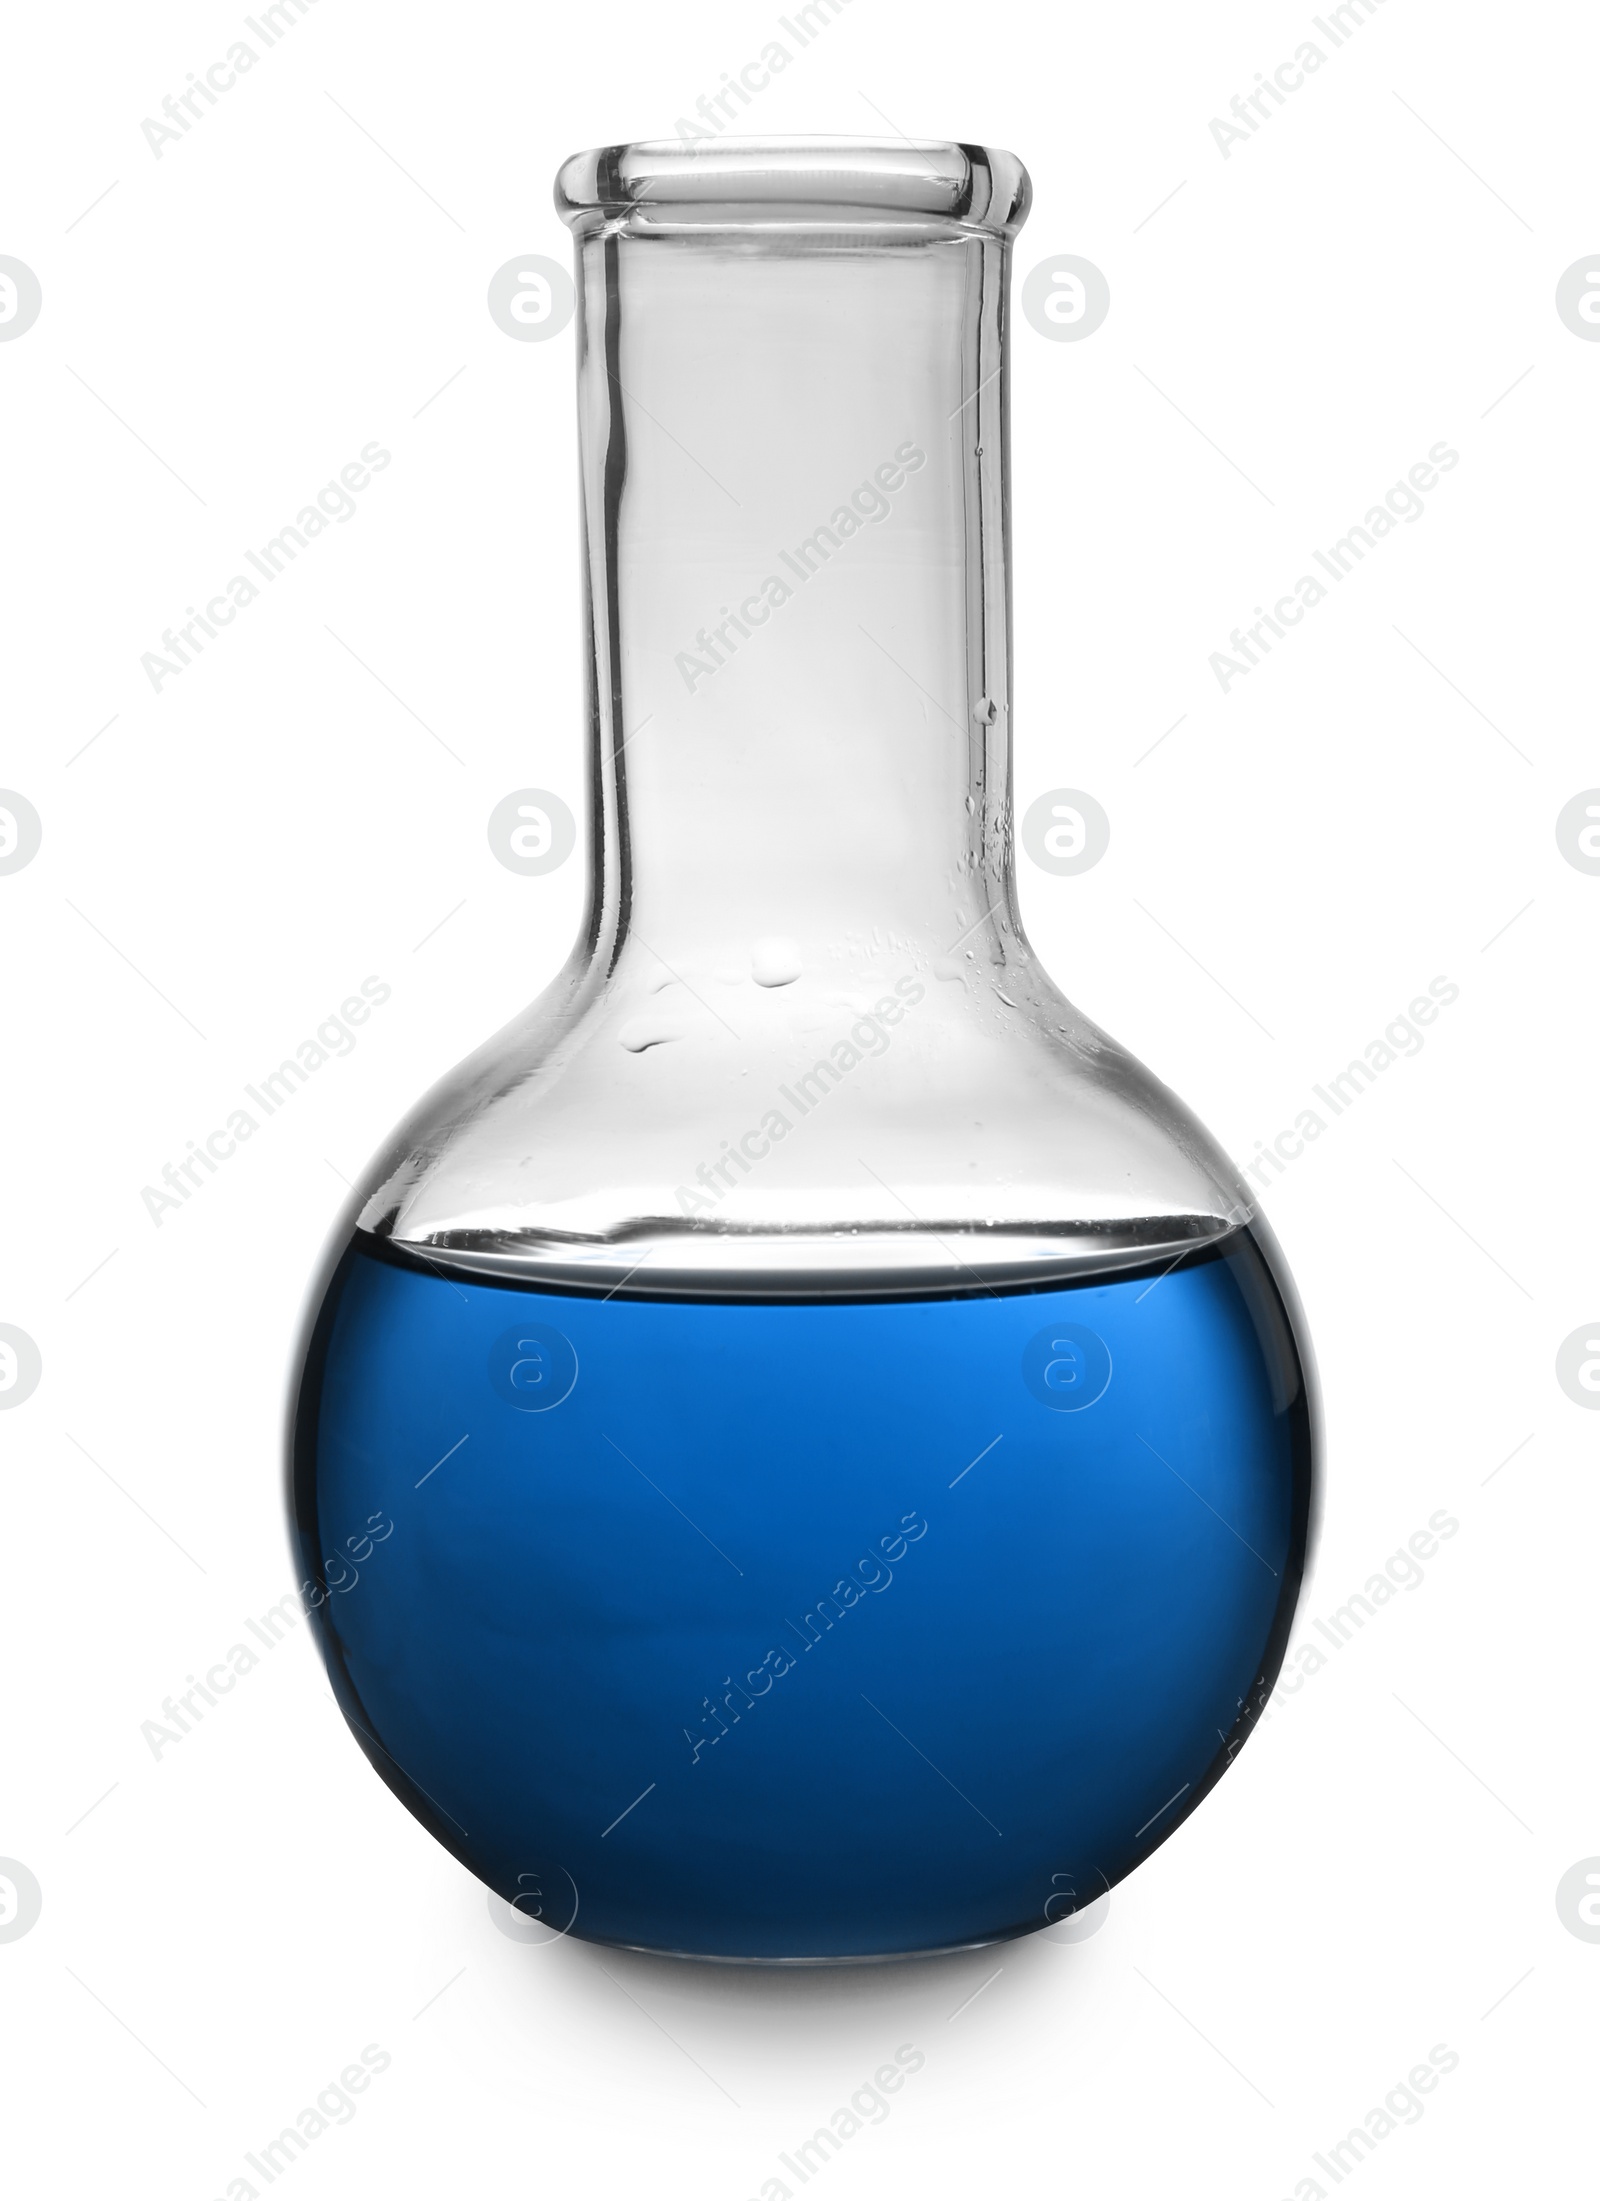 Image of Boiling flask with blue liquid isolated on white. Laboratory glassware